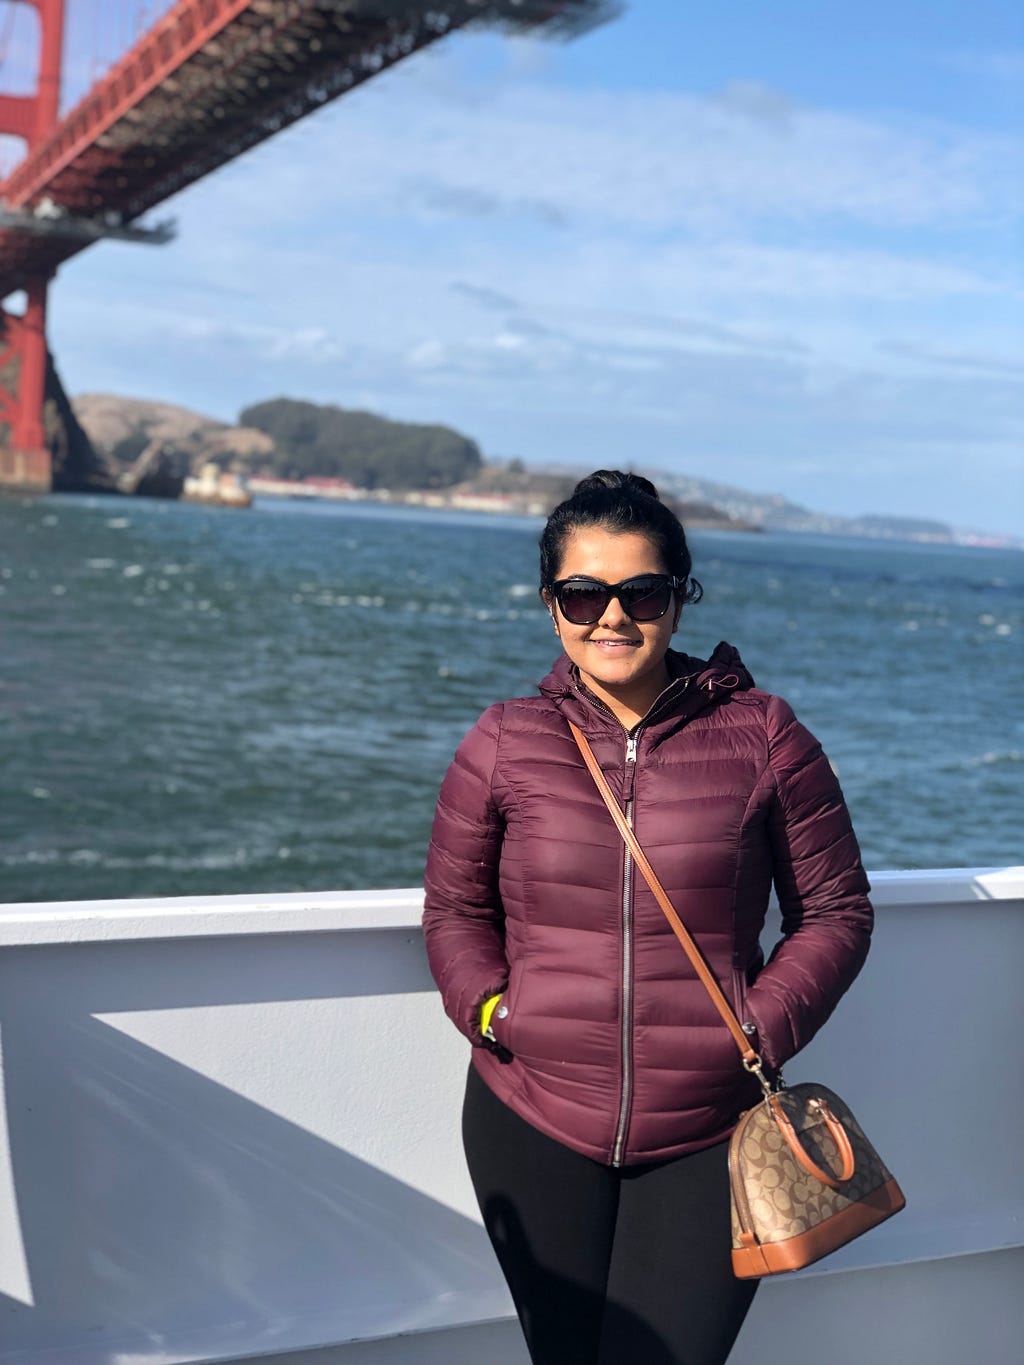 Juhi standing on the deck of a boat under the Golden Gate bridge.